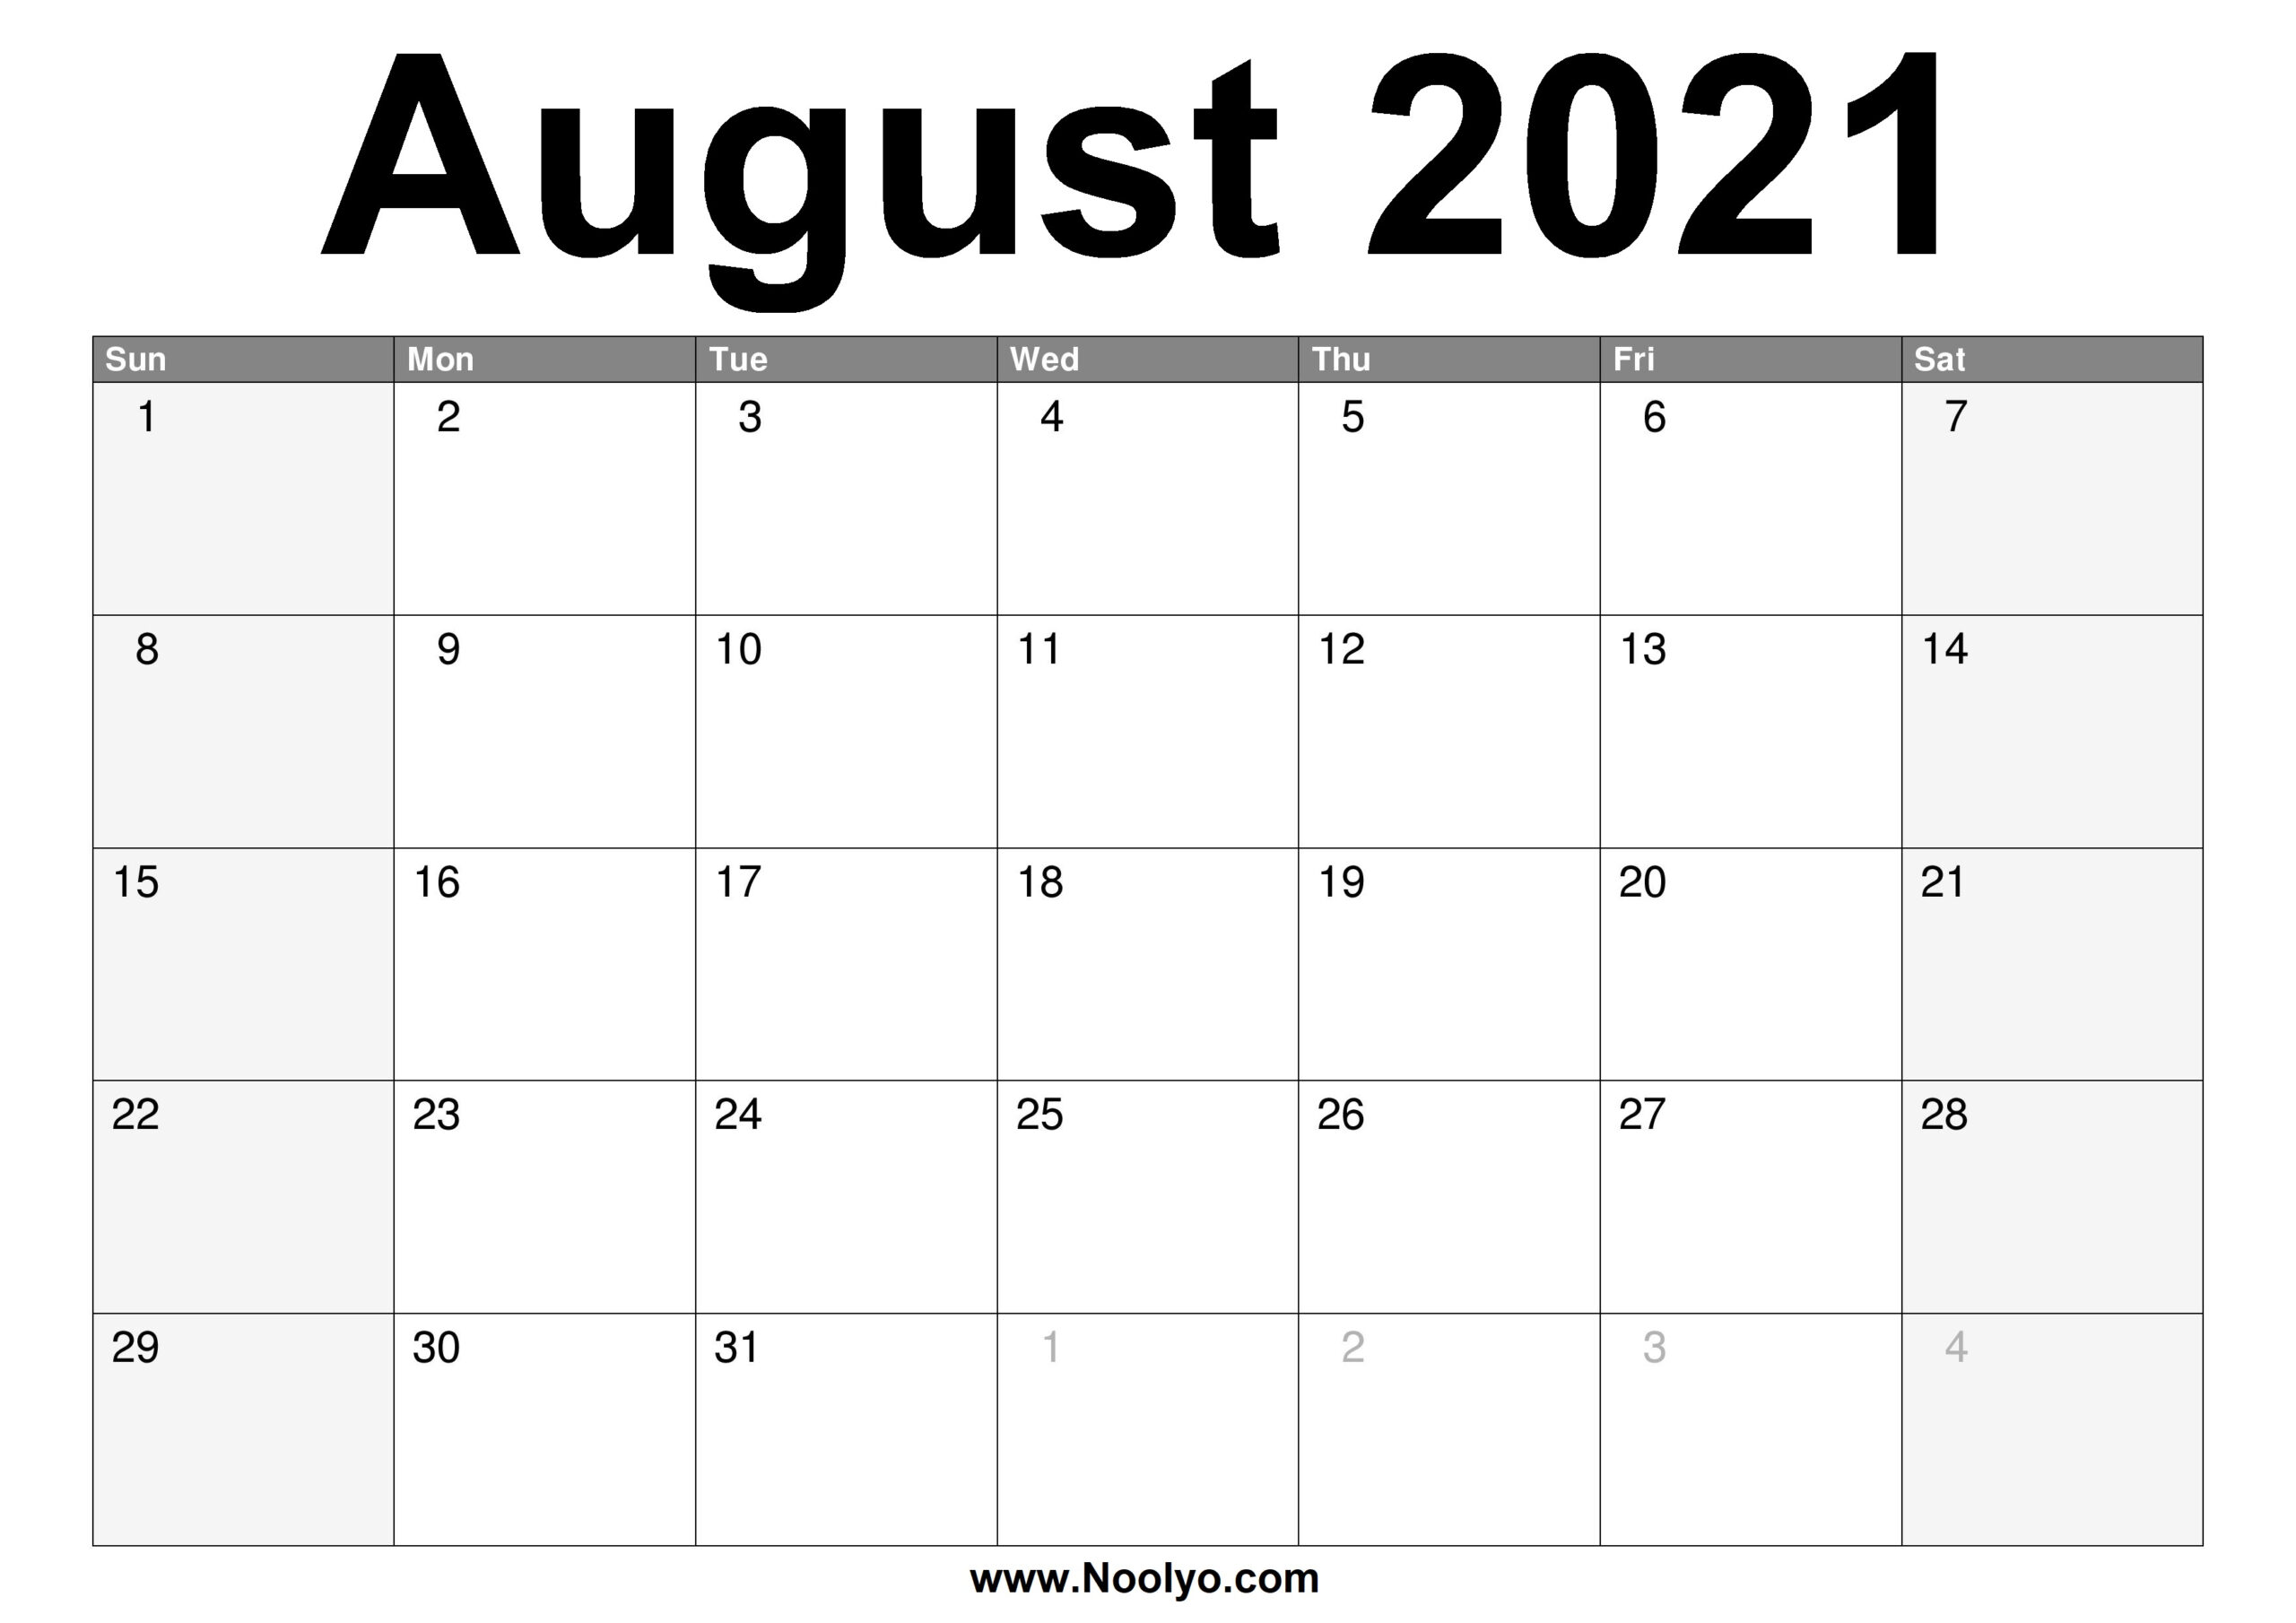 Calendar August 2021 | Printable March inside Calendars Printable 2021 Free With Grid Lines